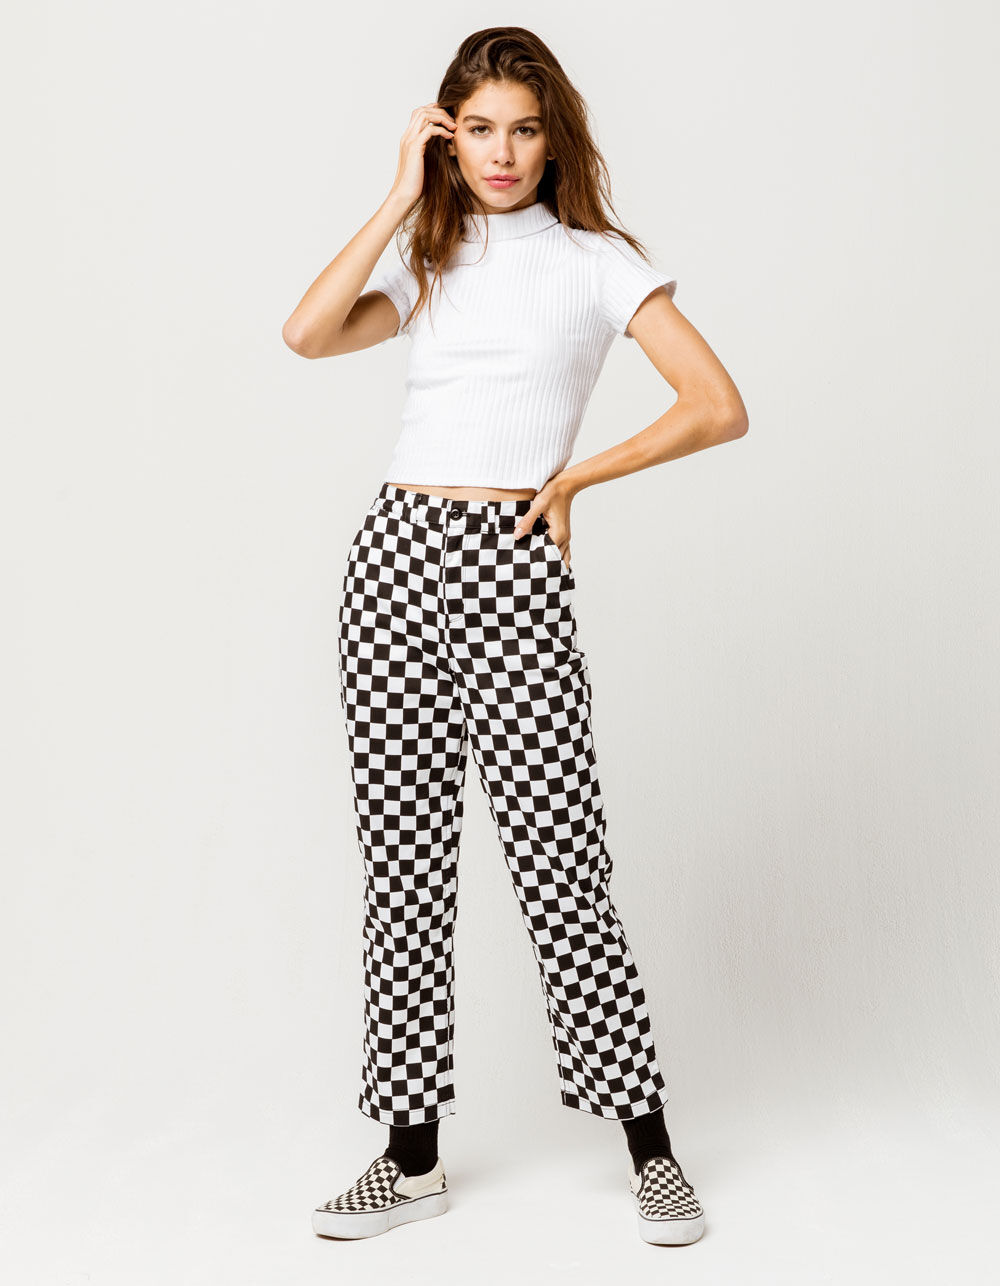 Vans Authentic Chino Print Pants Wmn (checkerboard)